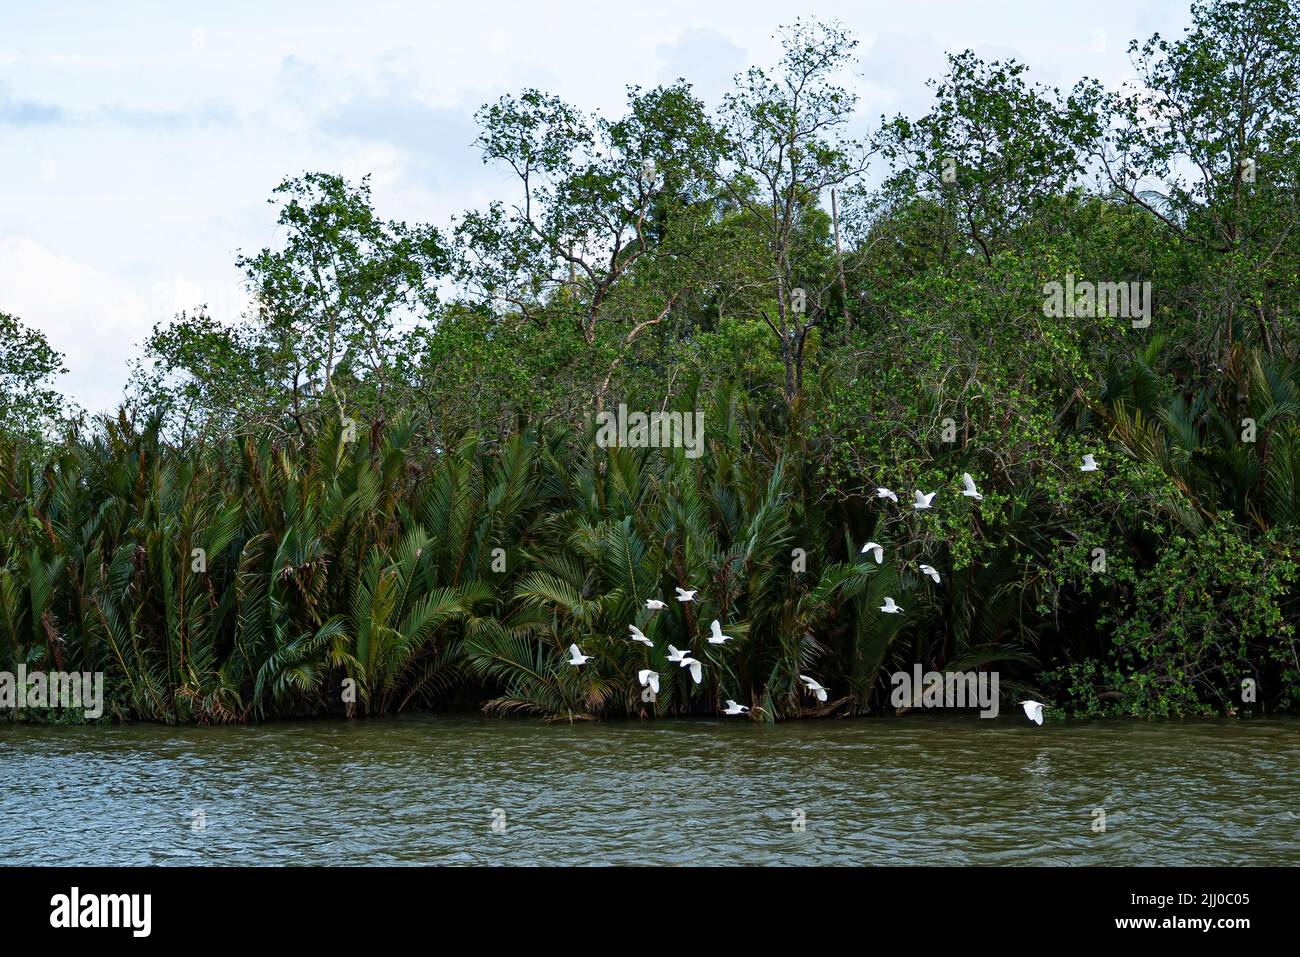 A flock of storks flying low across the river in the evening. Selective focus points. Stock Photo